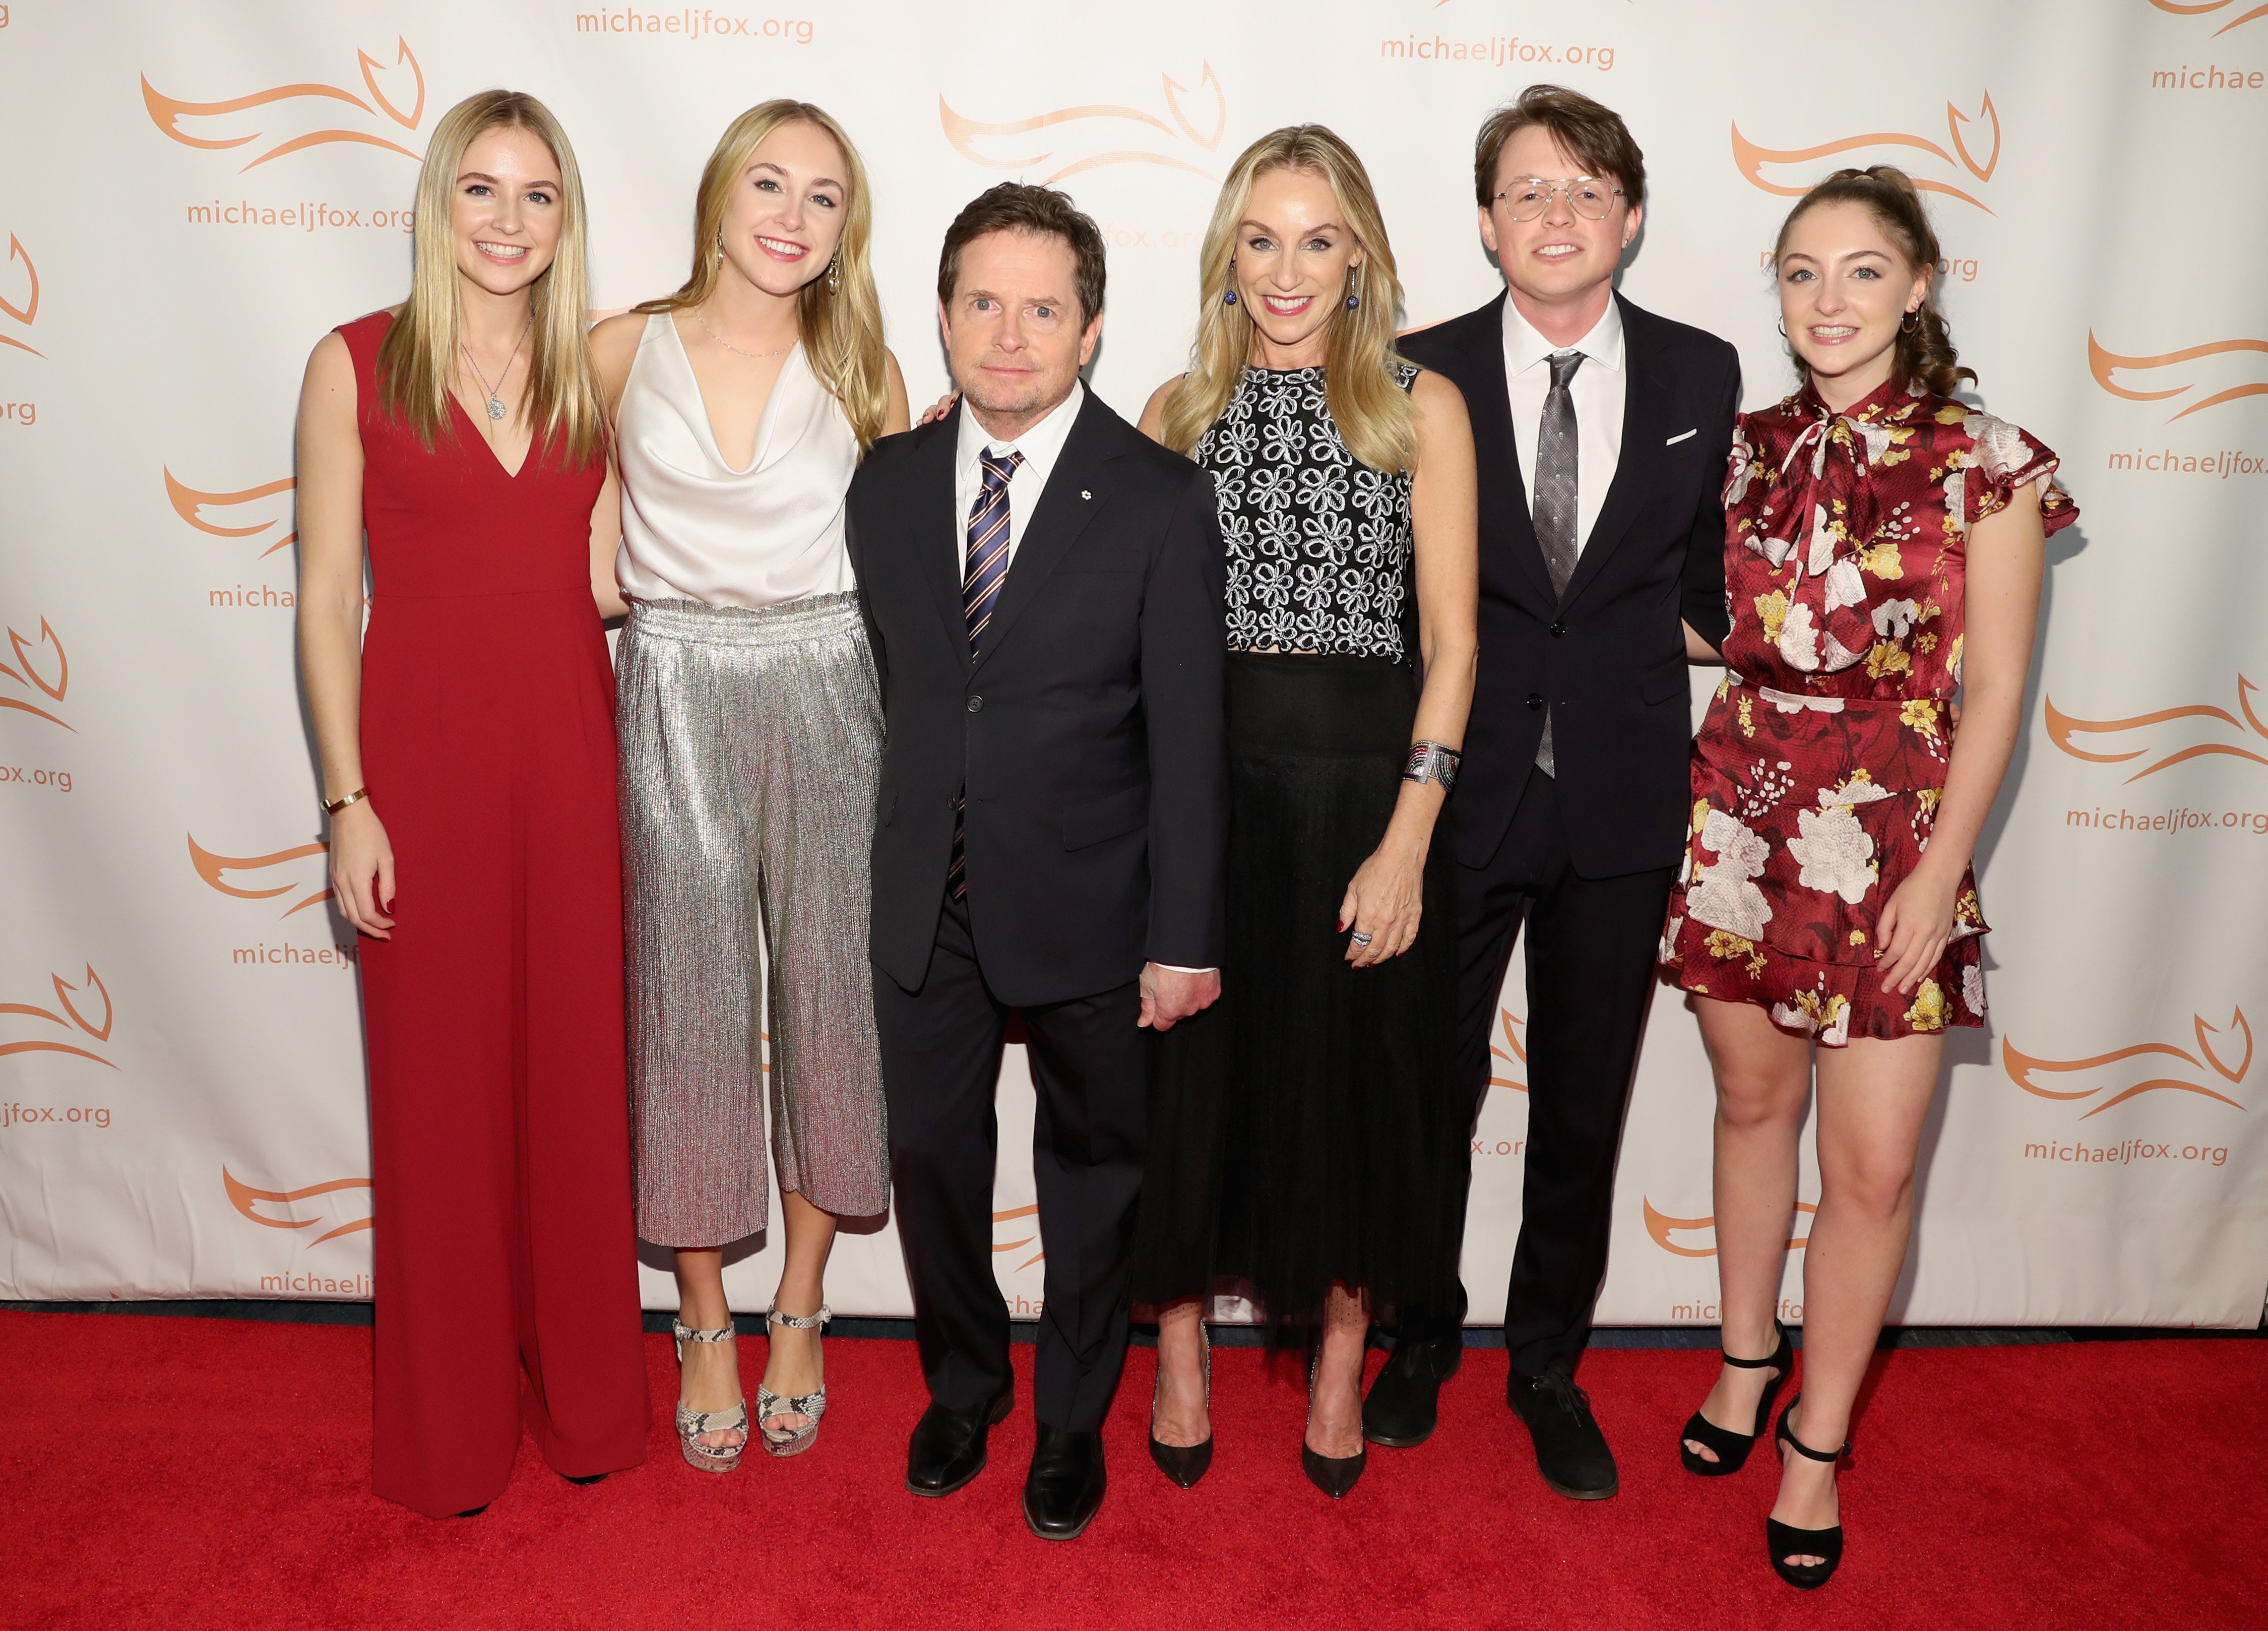 From left to right: Schuyler Fox, Aquinnah Fox, Michael J. Fox, Tracy Pollan, Sam Fox, and Esme Fox on the red carpet of A Funny Thing Happened On The Way To Cure Parkinson's benefitting The Michael J. Fox Foundation at the Hilton on November 10, 2018 in New York. / Source: Getty Images